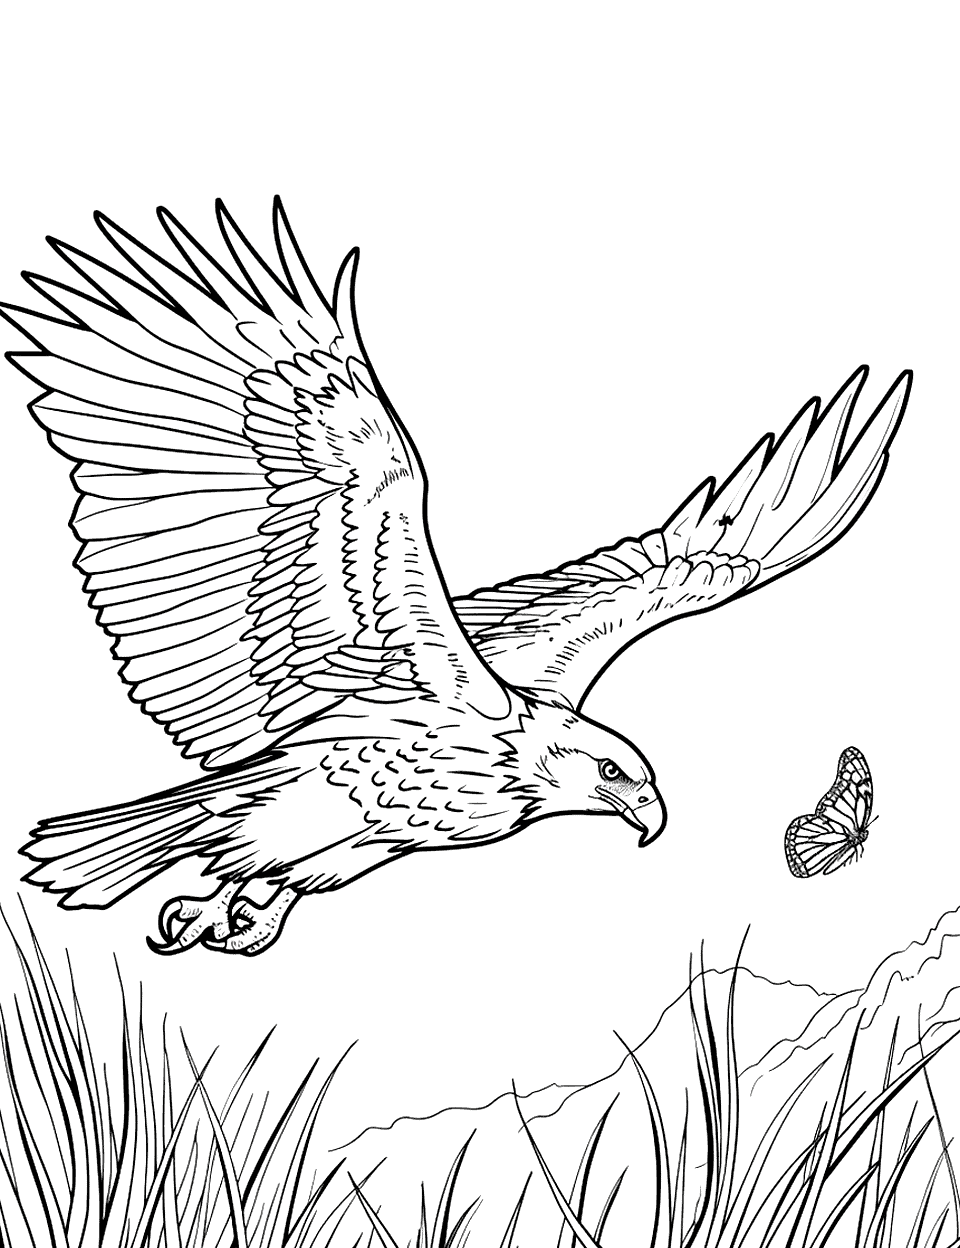 Eagle's First Hunt Eagle Coloring Page - A young eagle chases after a butterfly over a grassy field, showing the early instincts of a hunter.